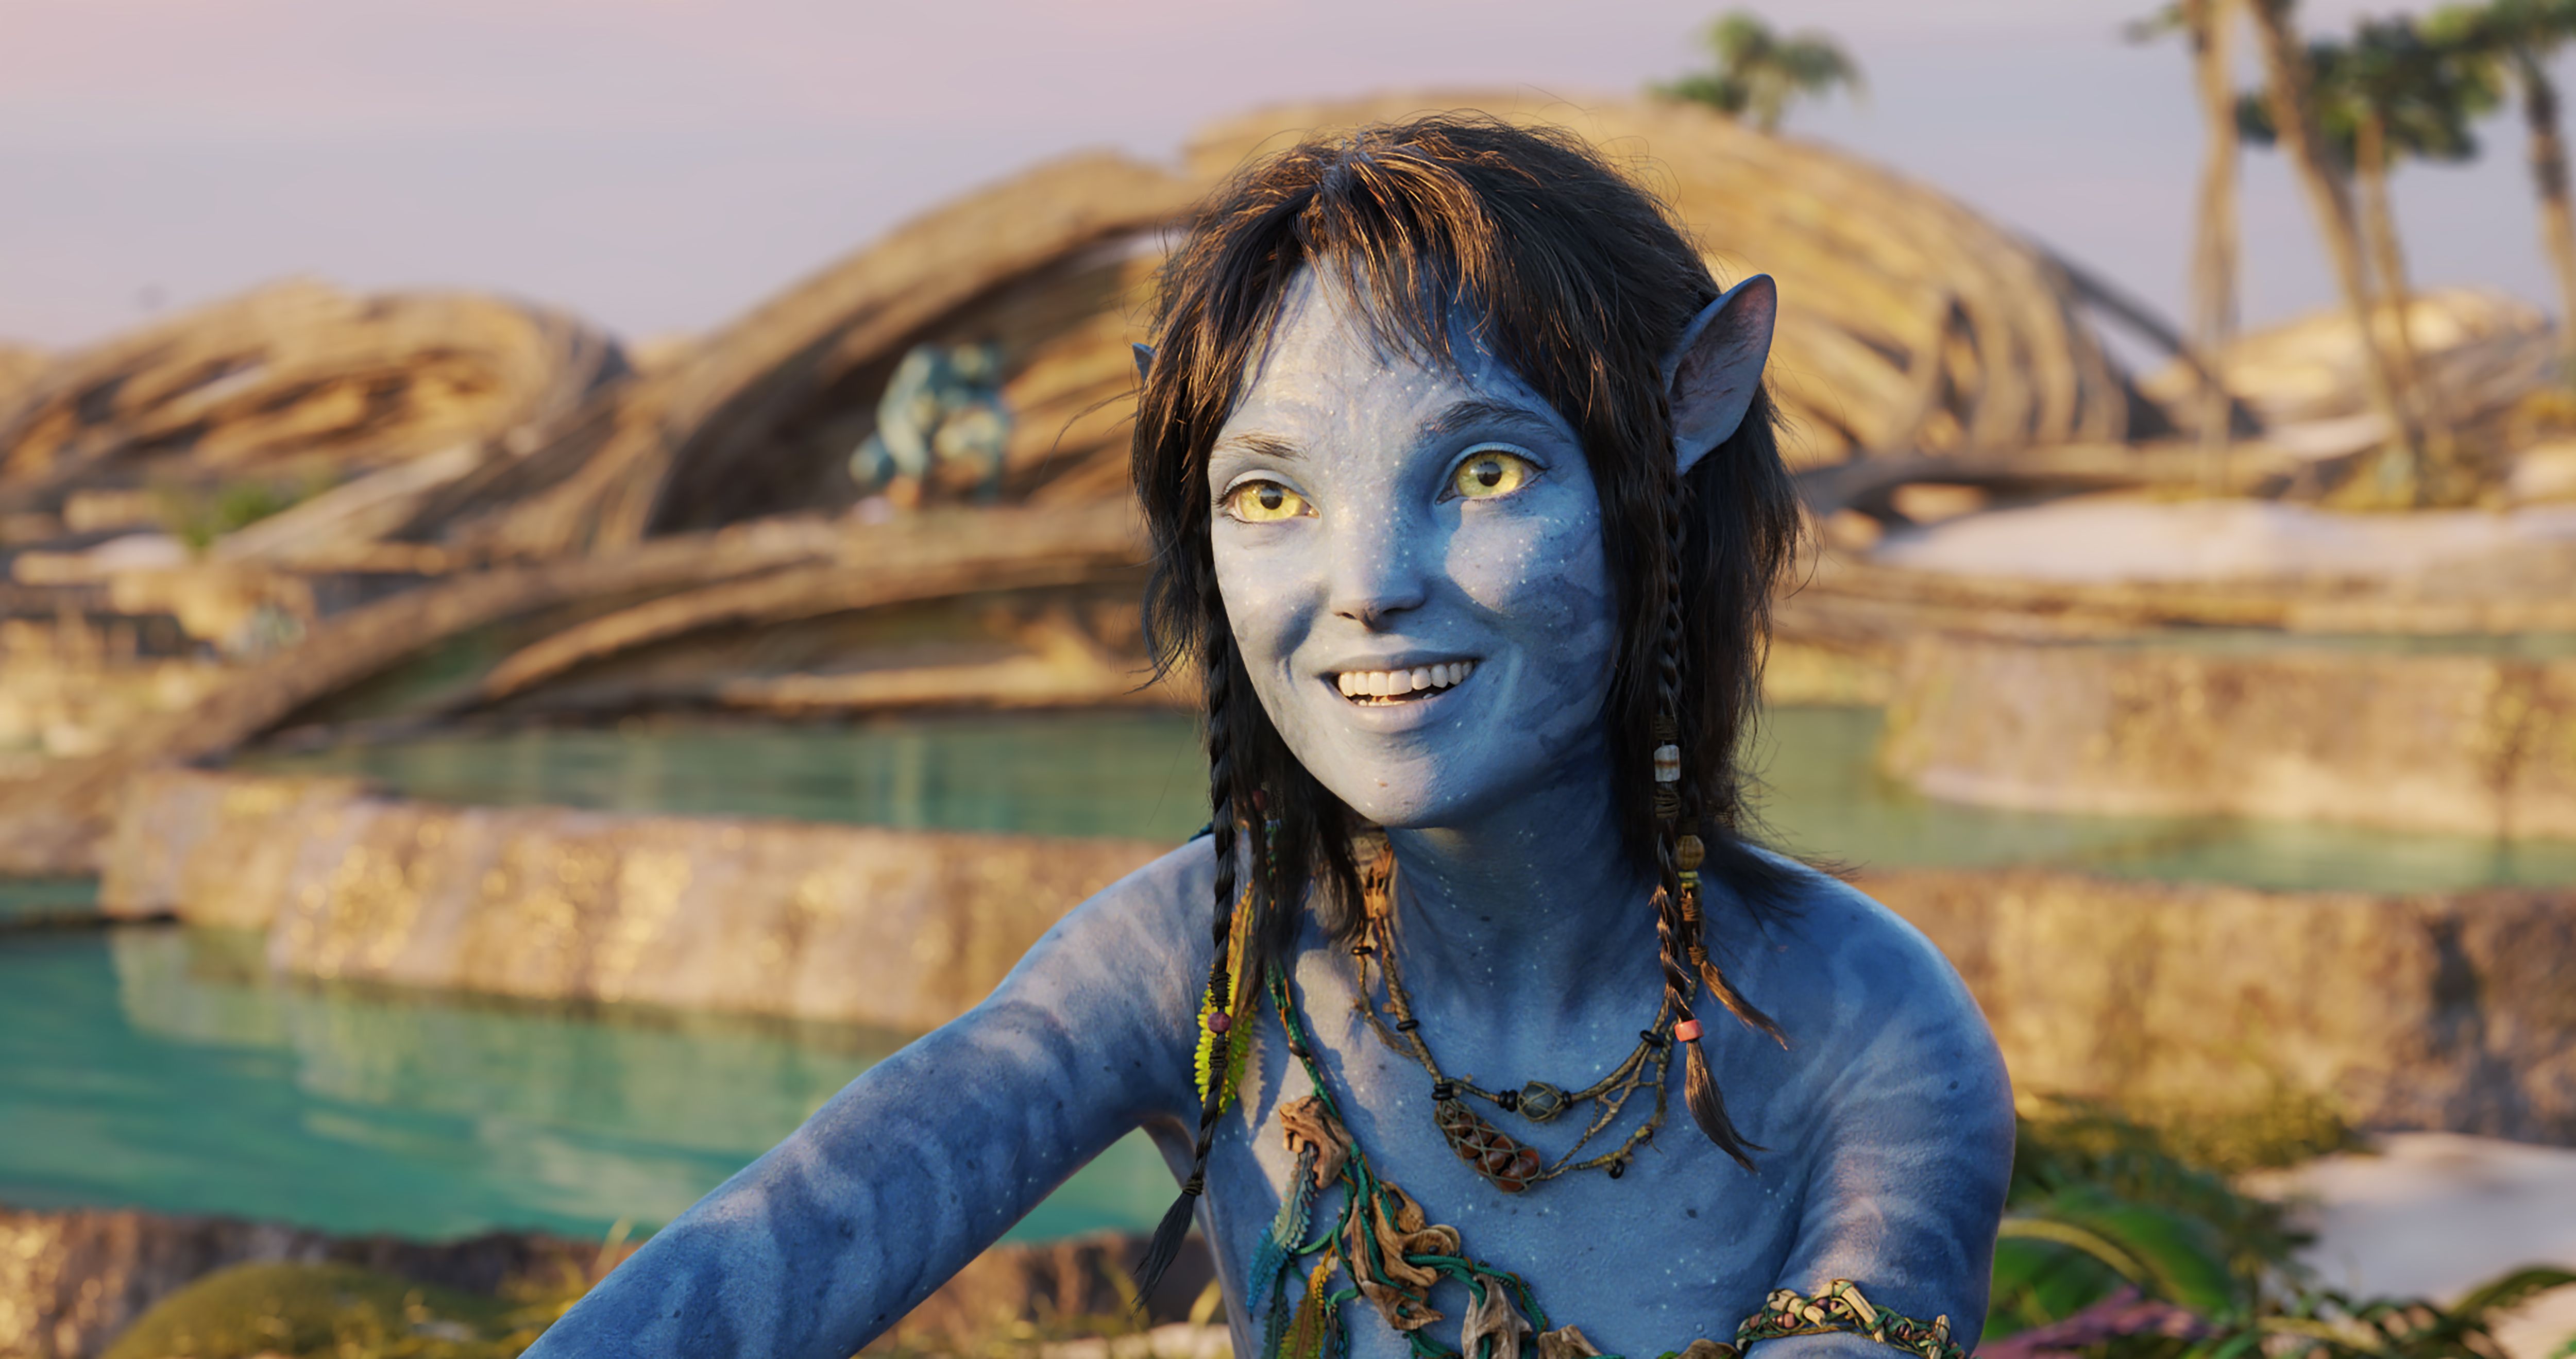 James Cameron opens up about Avatar 2 his longawaited sequel  EWcom